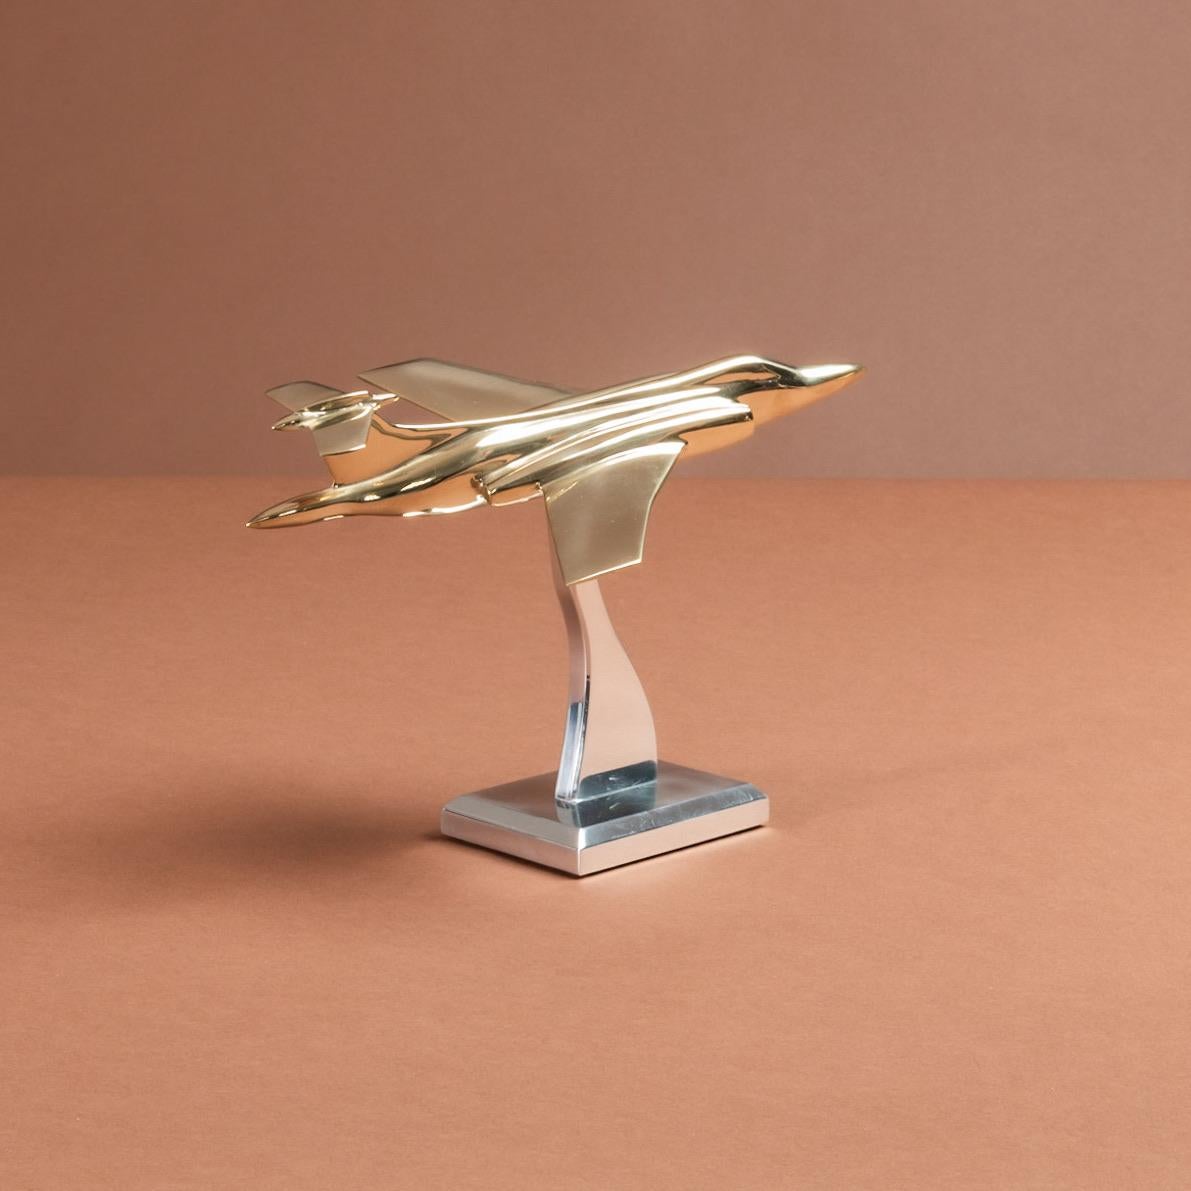 A polished cast brass model of an S.2 Buccaneer jet, circa 1965. Mounted on newly made polished aluminium stand.

Dimensions: 18cm/ 7⅛ inches (wingspan) x  26cm/ 10¼ inches (length) x 18cm/ 7⅛ inches (height on stand).

What was the Blackburn S.2